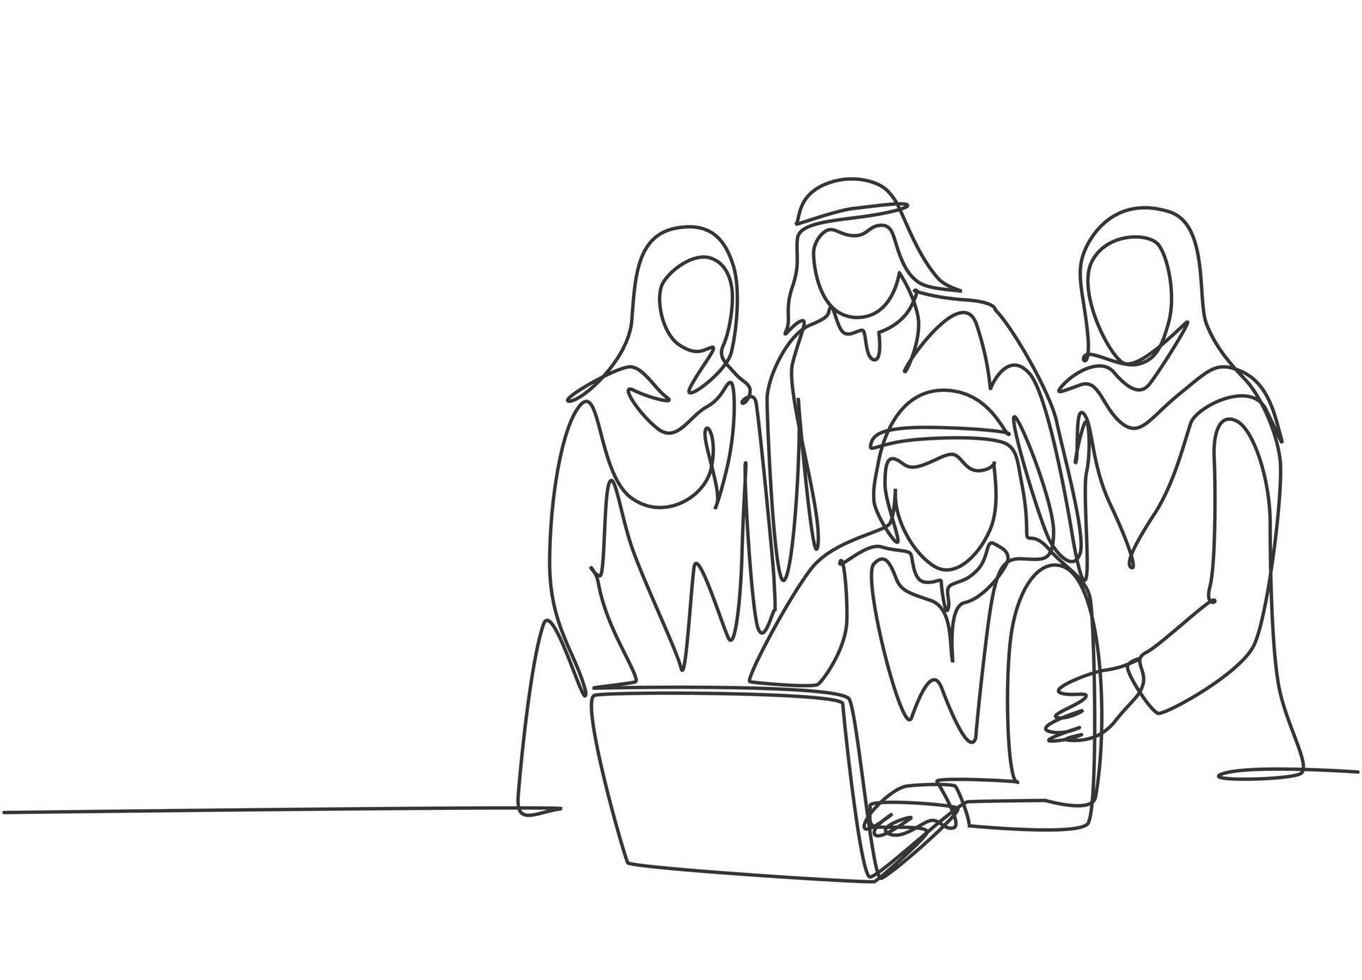 One single line drawing of young happy muslim startup team members pose together solidly. Saudi Arabia cloth shmag, kandora, headscarf, thobe, ghutra. Continuous line draw design vector illustration